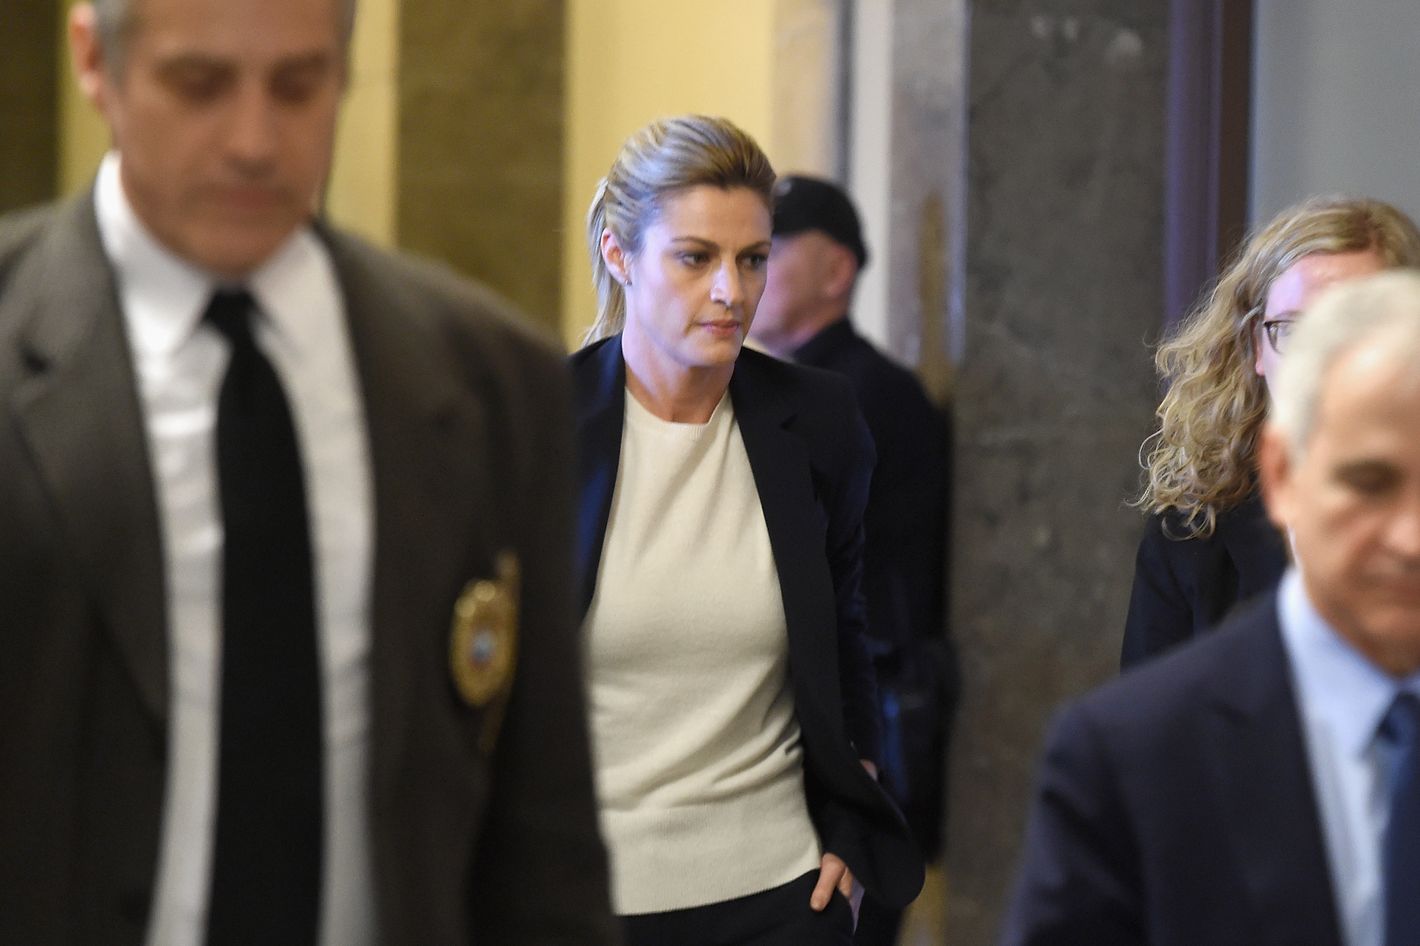 Hotel in Erin Andrews Suit Says Being Stalked and Publicly Humiliated Helped Her Career